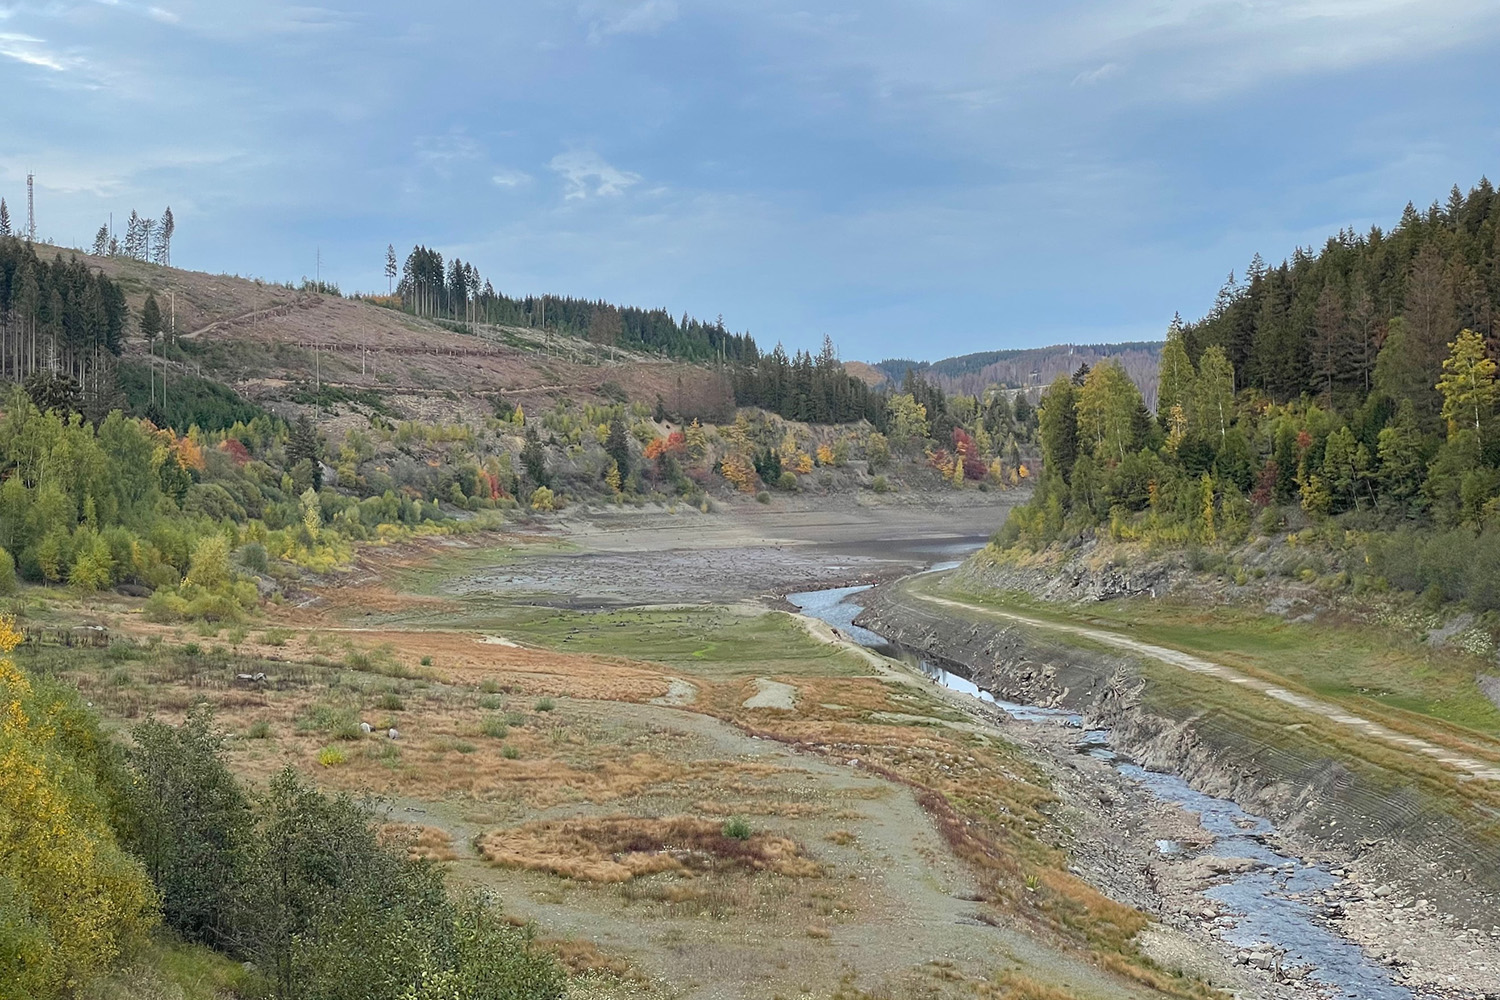 The Okertalsperre in the Harz Mountains in October 2022: Persistent drought leads to low water levels and tree mortality, which in turn makes soils more vulnerable and less receptive to precipitation. Photo credit: Sándor Fekete/TU Braunschweig